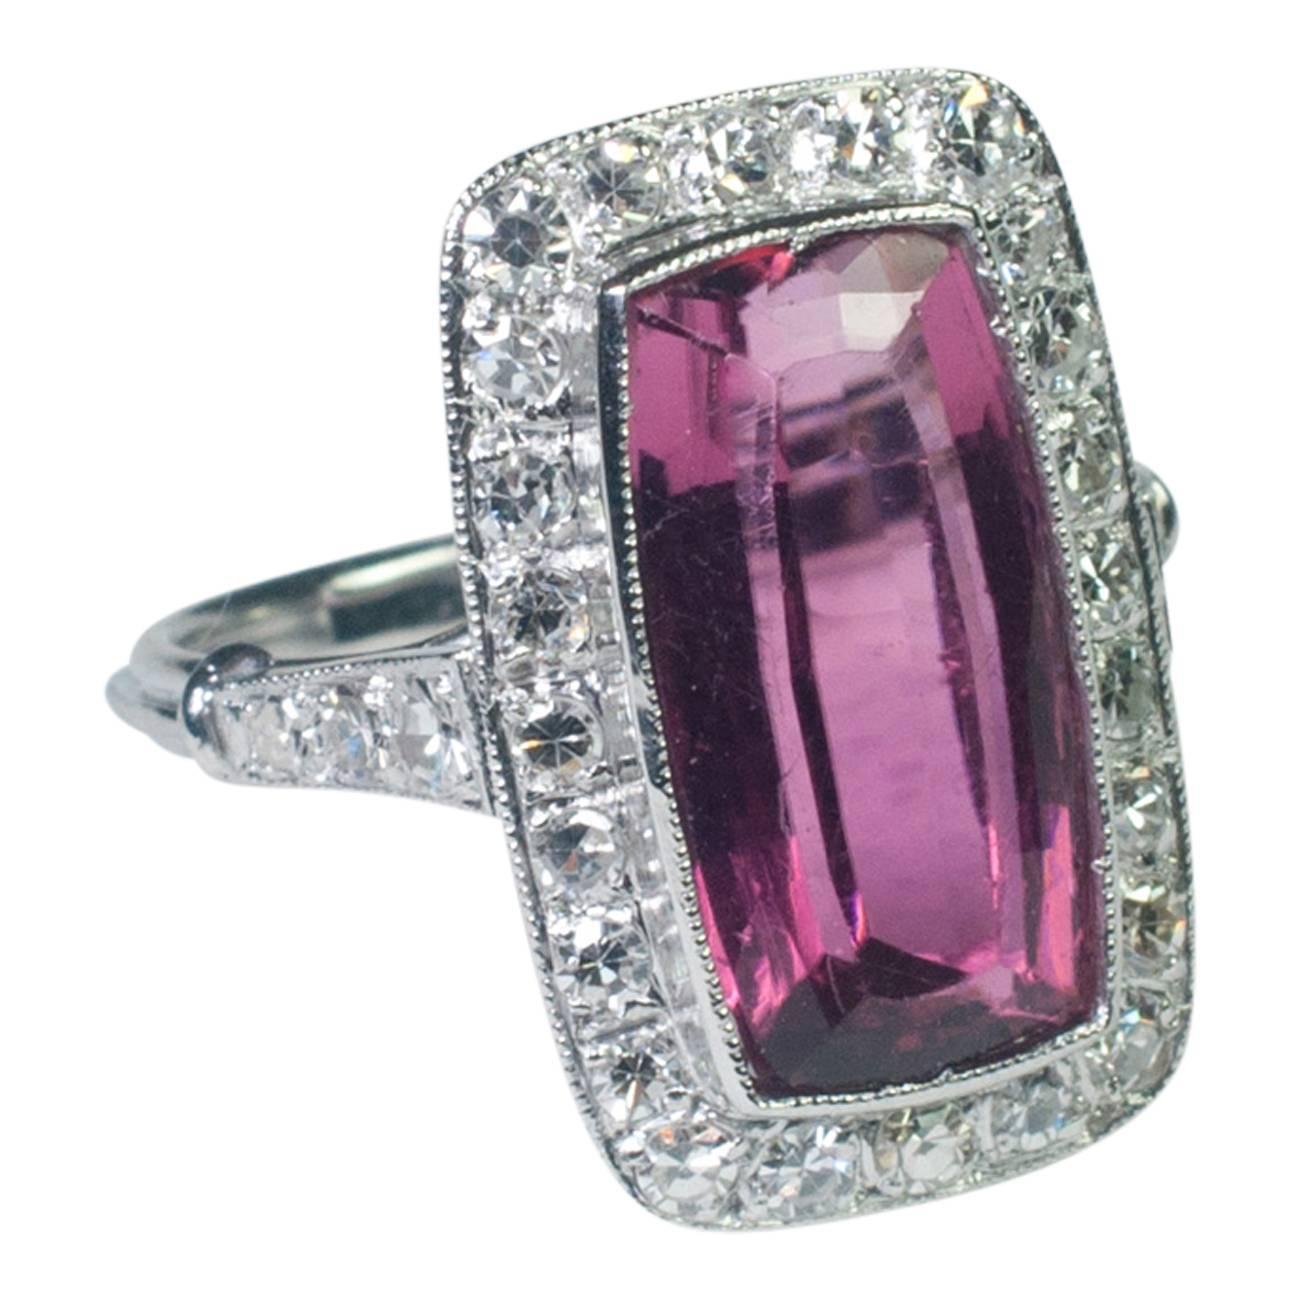 The dark pink tourmaline weighs 4.64ct and is surrounded by 8-cut diamonds and diamond shoulders.  The total diamond weight is 0.84ct.  The ring is mounted on a triple reeded shank and tests as platinum.  Length 1.55cm x width 0.80cm.  Finger size L